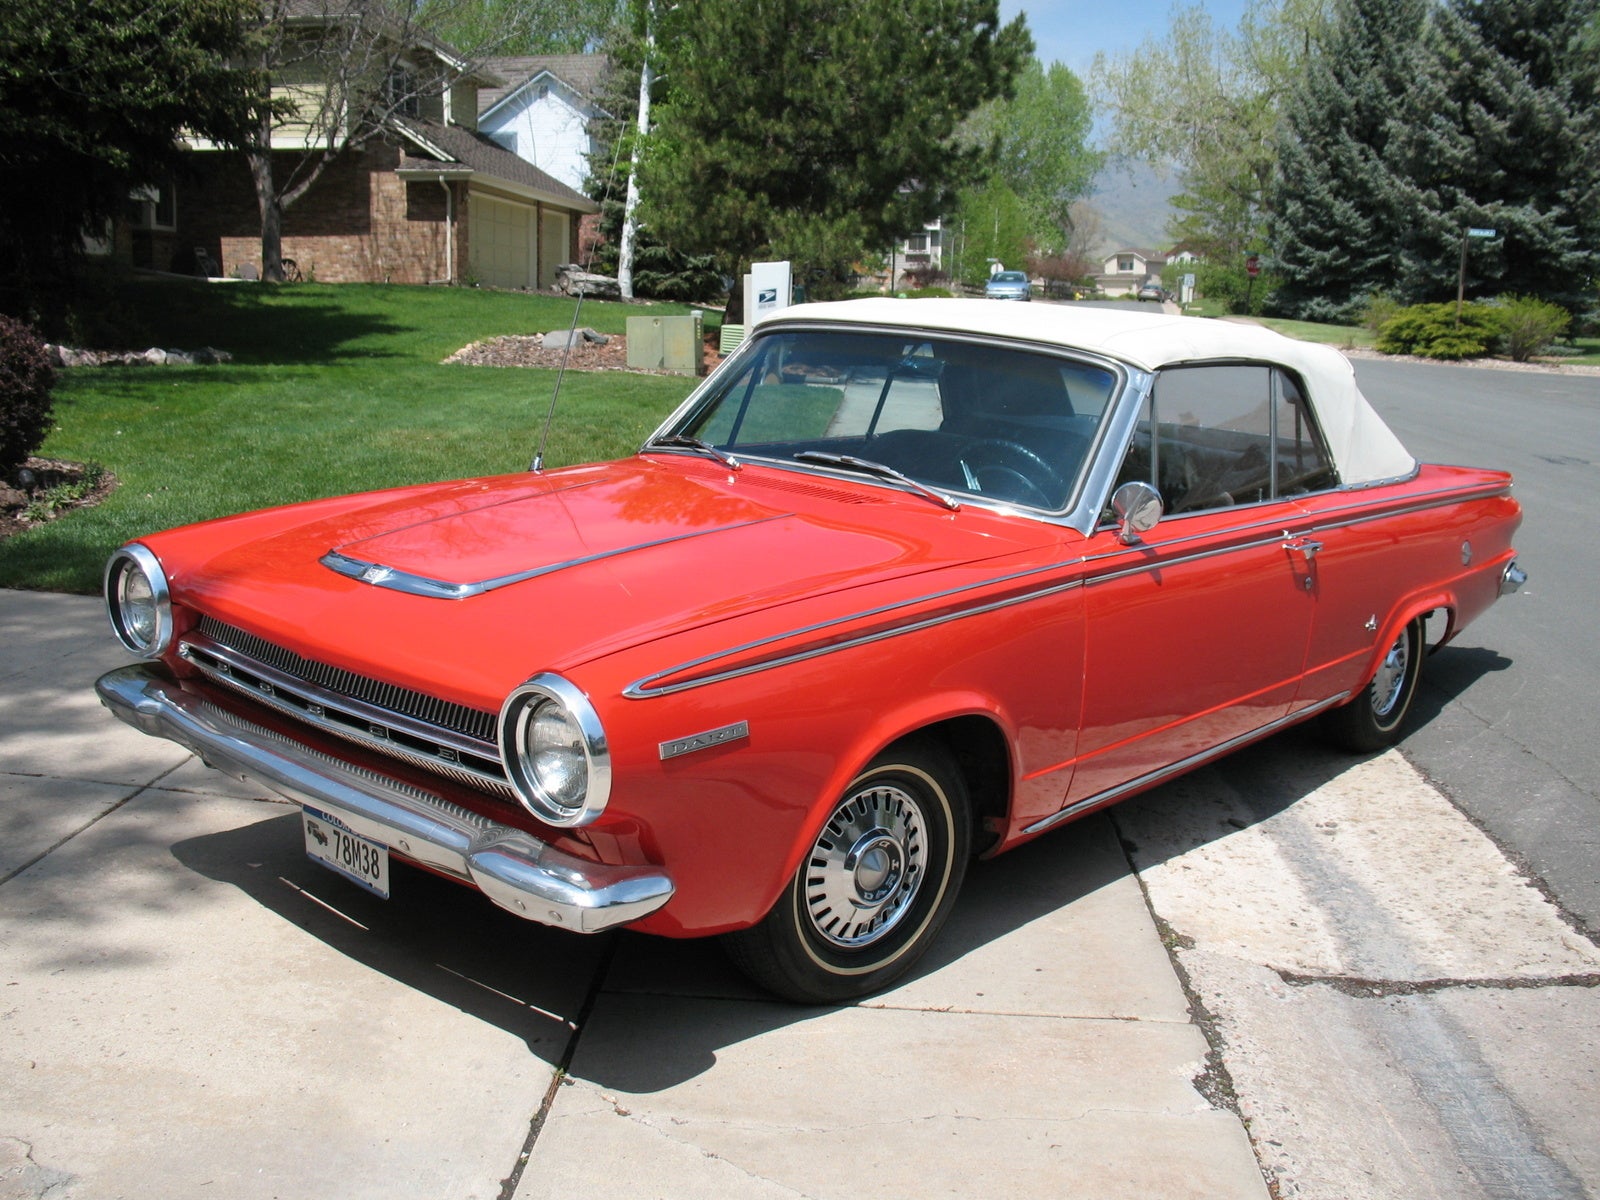 Dodge Dart Questions  is weather stripping a do it yourself project for a rookie  CarGurus